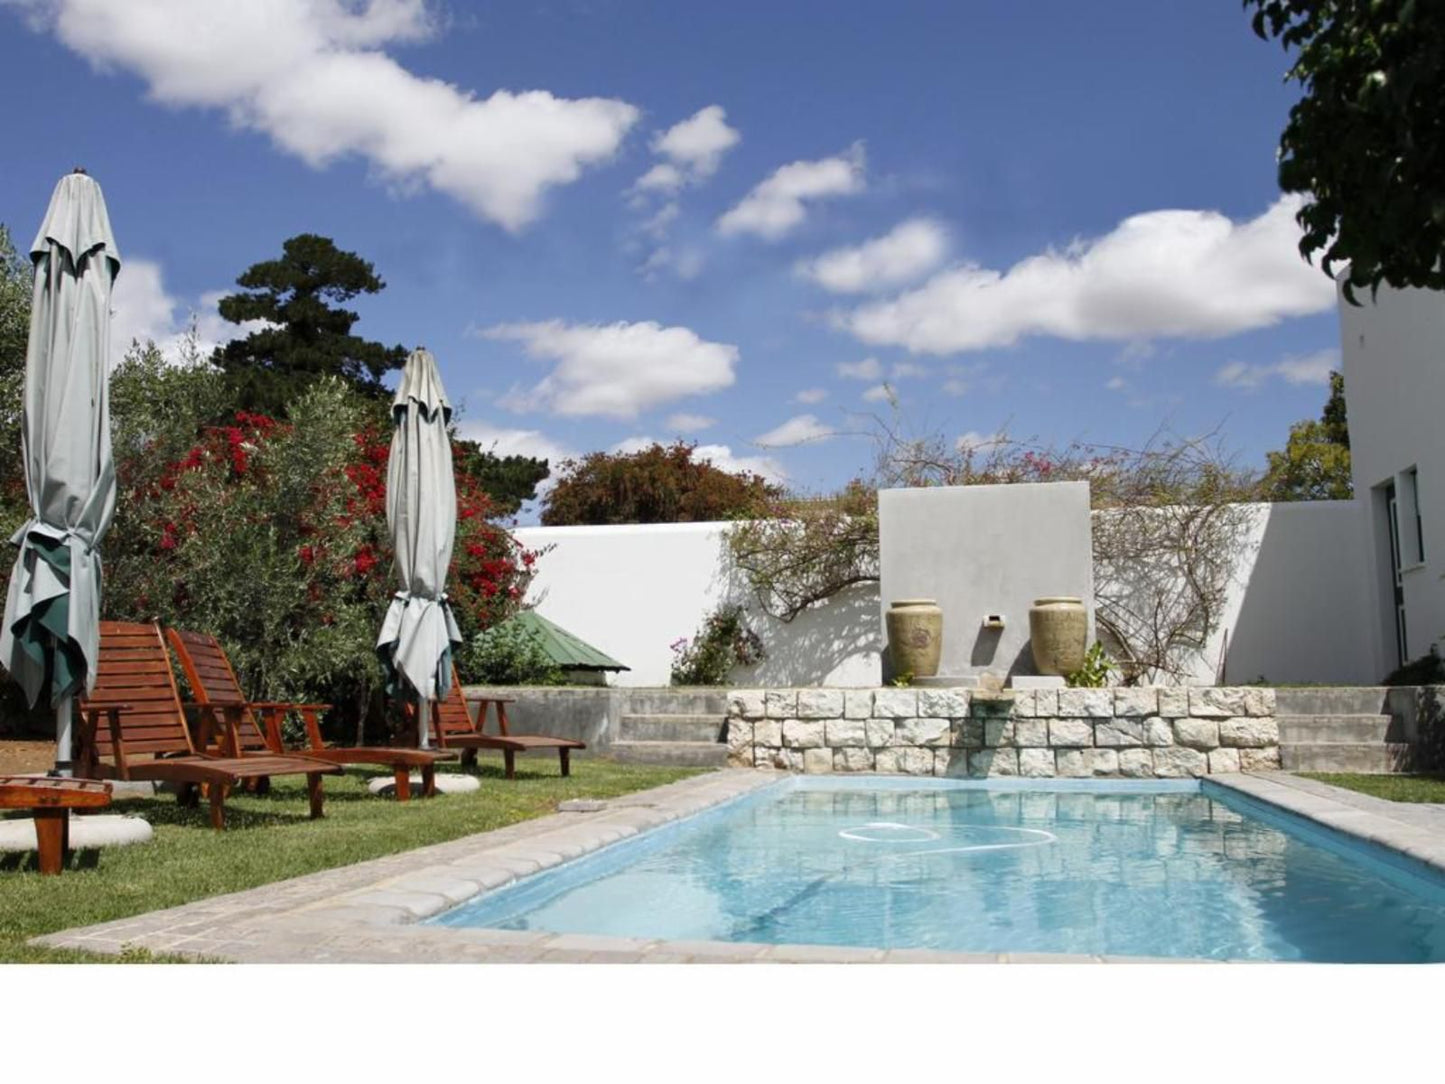 De Doornkraal Historic Country House Riversdale Western Cape South Africa Swimming Pool